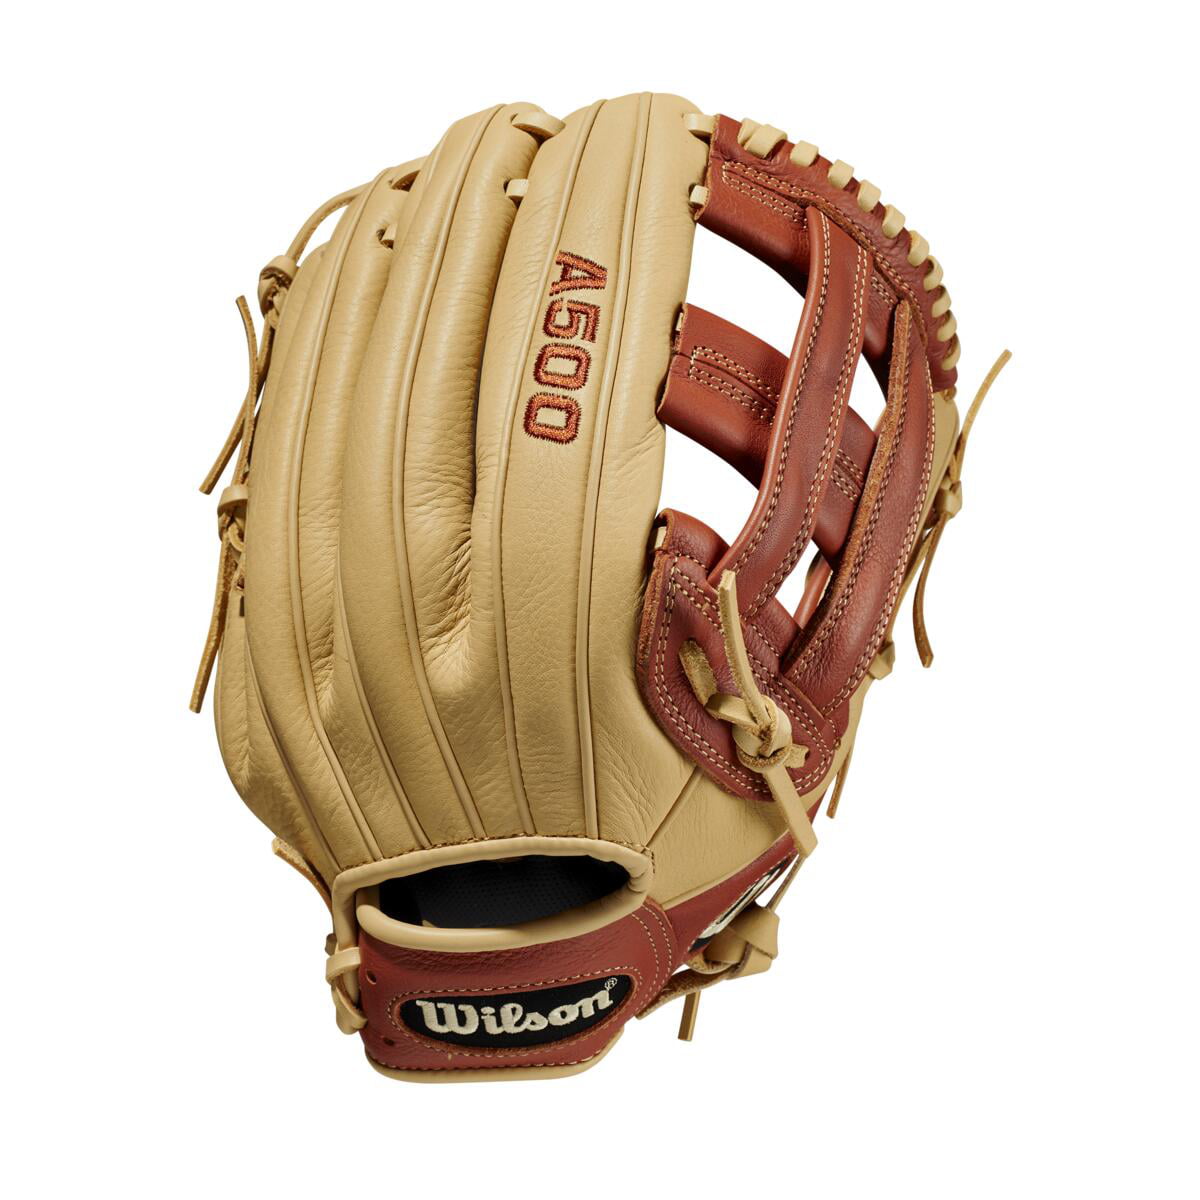 Wilson A500 Game Soft FP 11 Fast Pitch Glove Right Hand Throw for sale online 